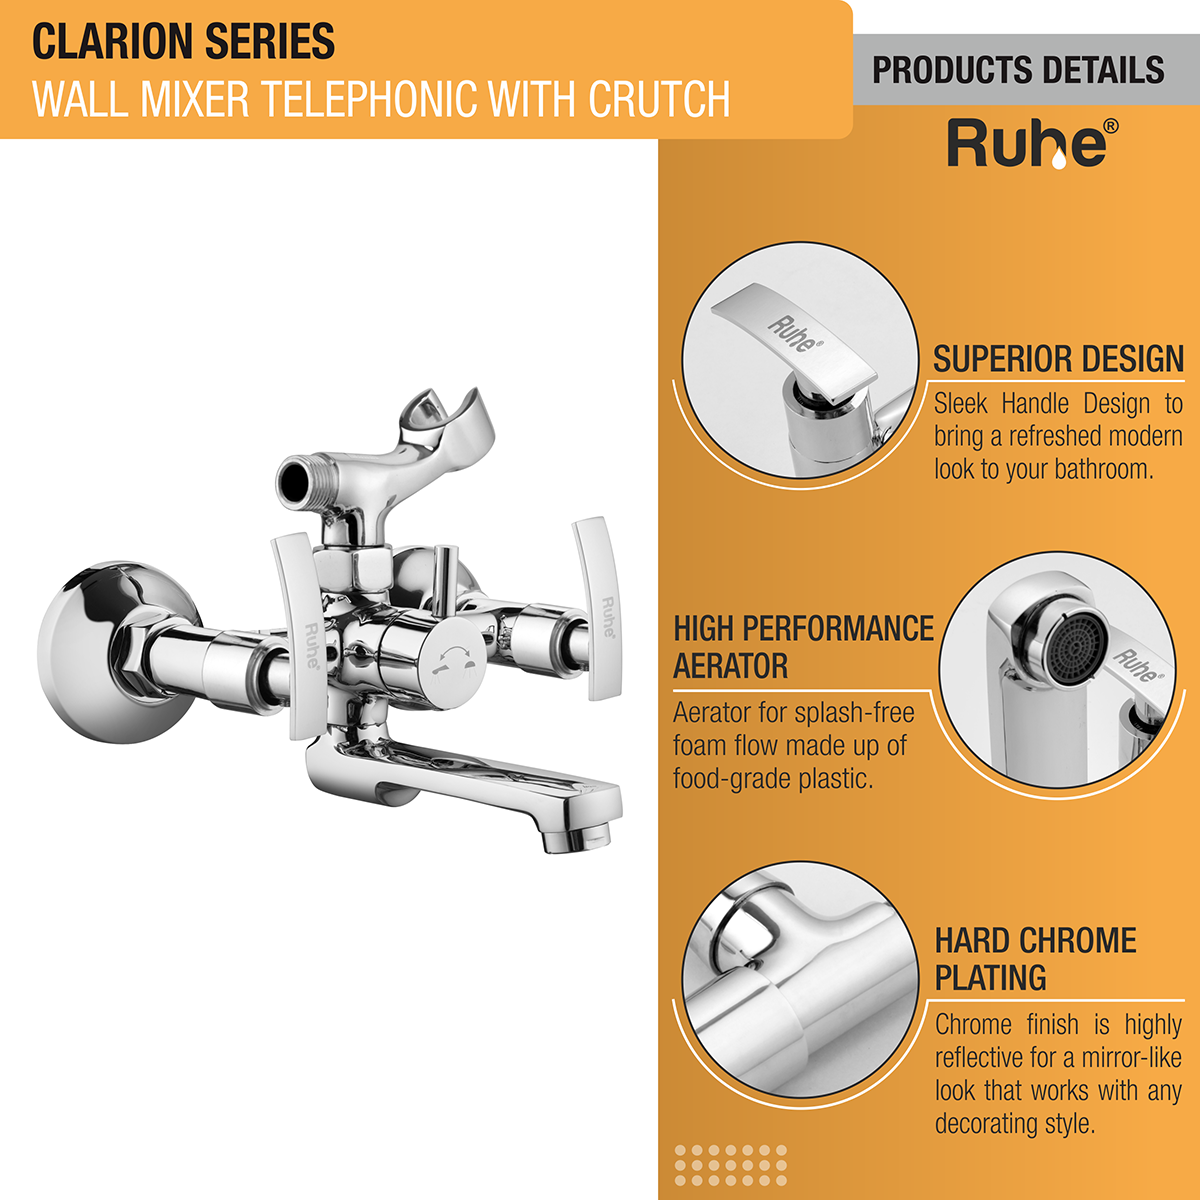 Clarion Telephonic Wall Mixer Brass Faucet (with Crutch) product details